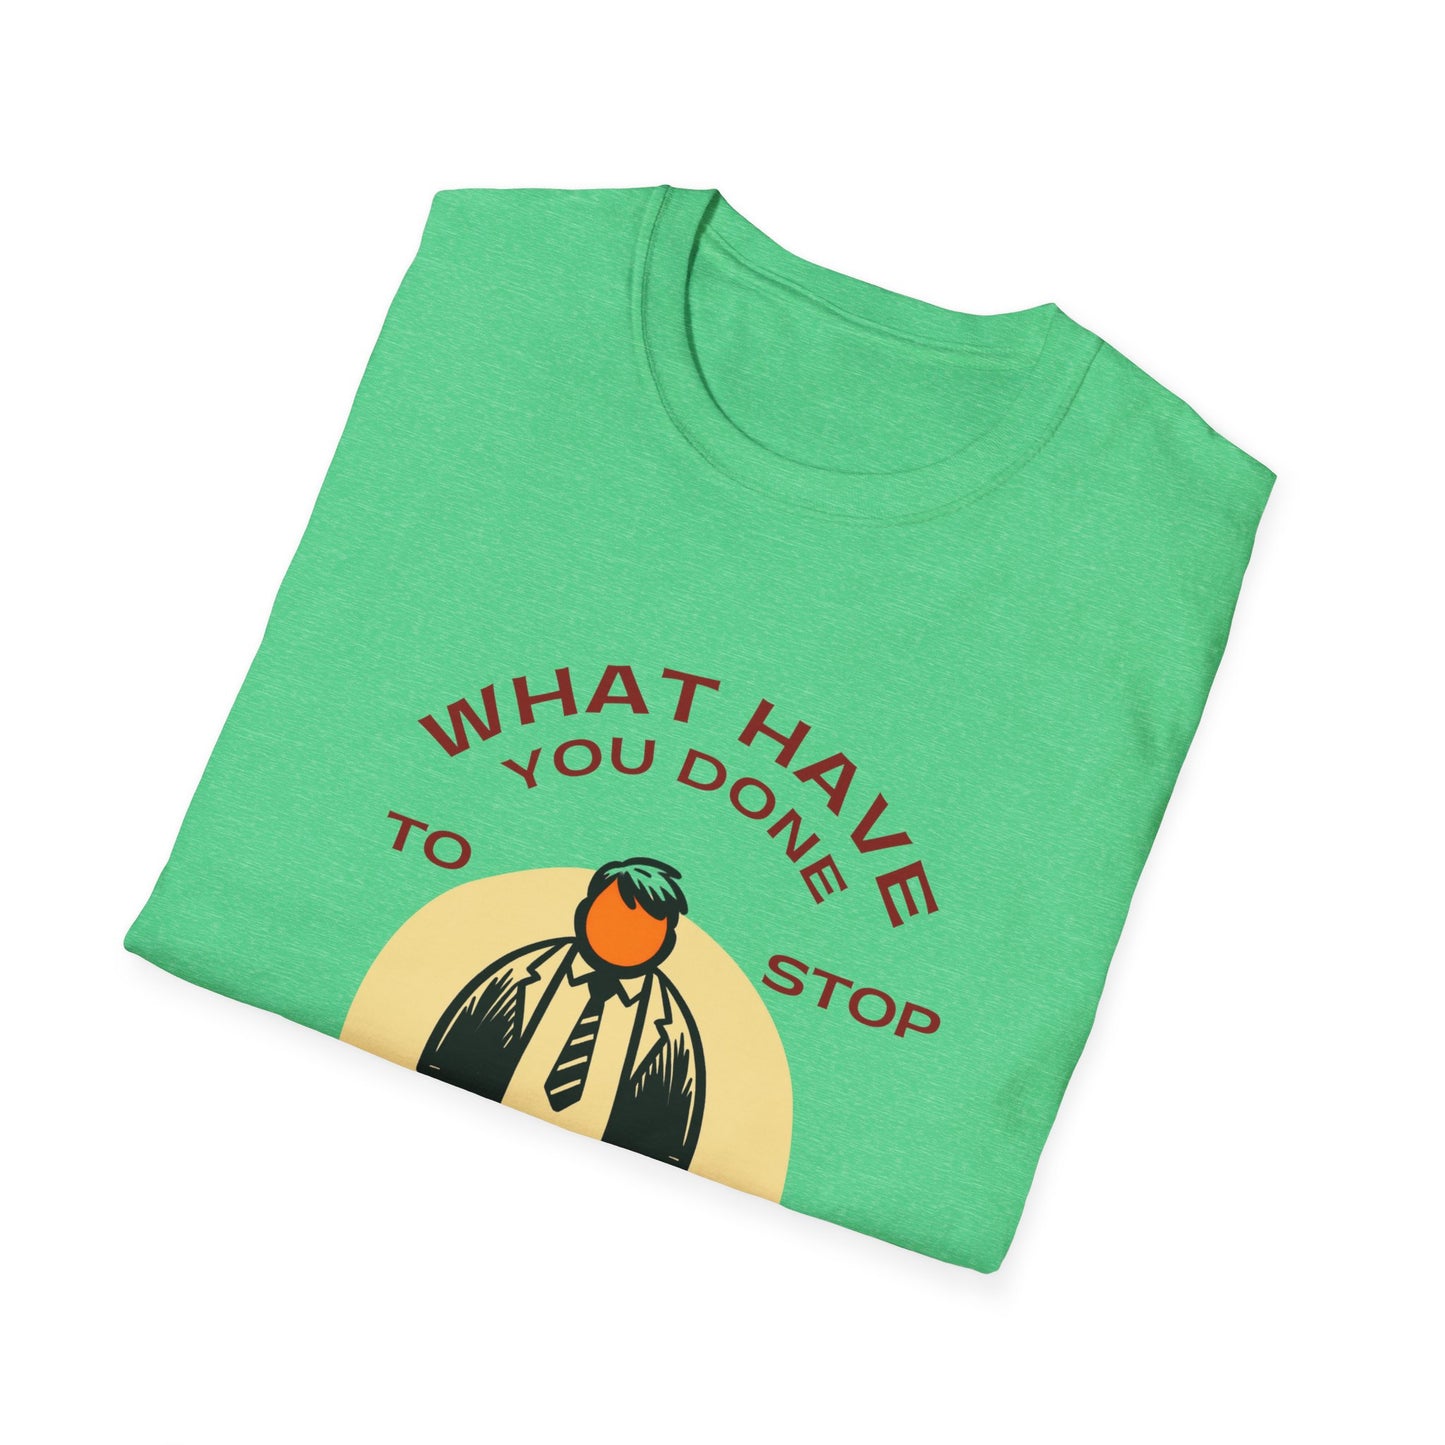 What Have You Done to Stop the Orange Dictator Today? Bold Question Soft-Style t-shirt |unisex| Activist Challenge Statement